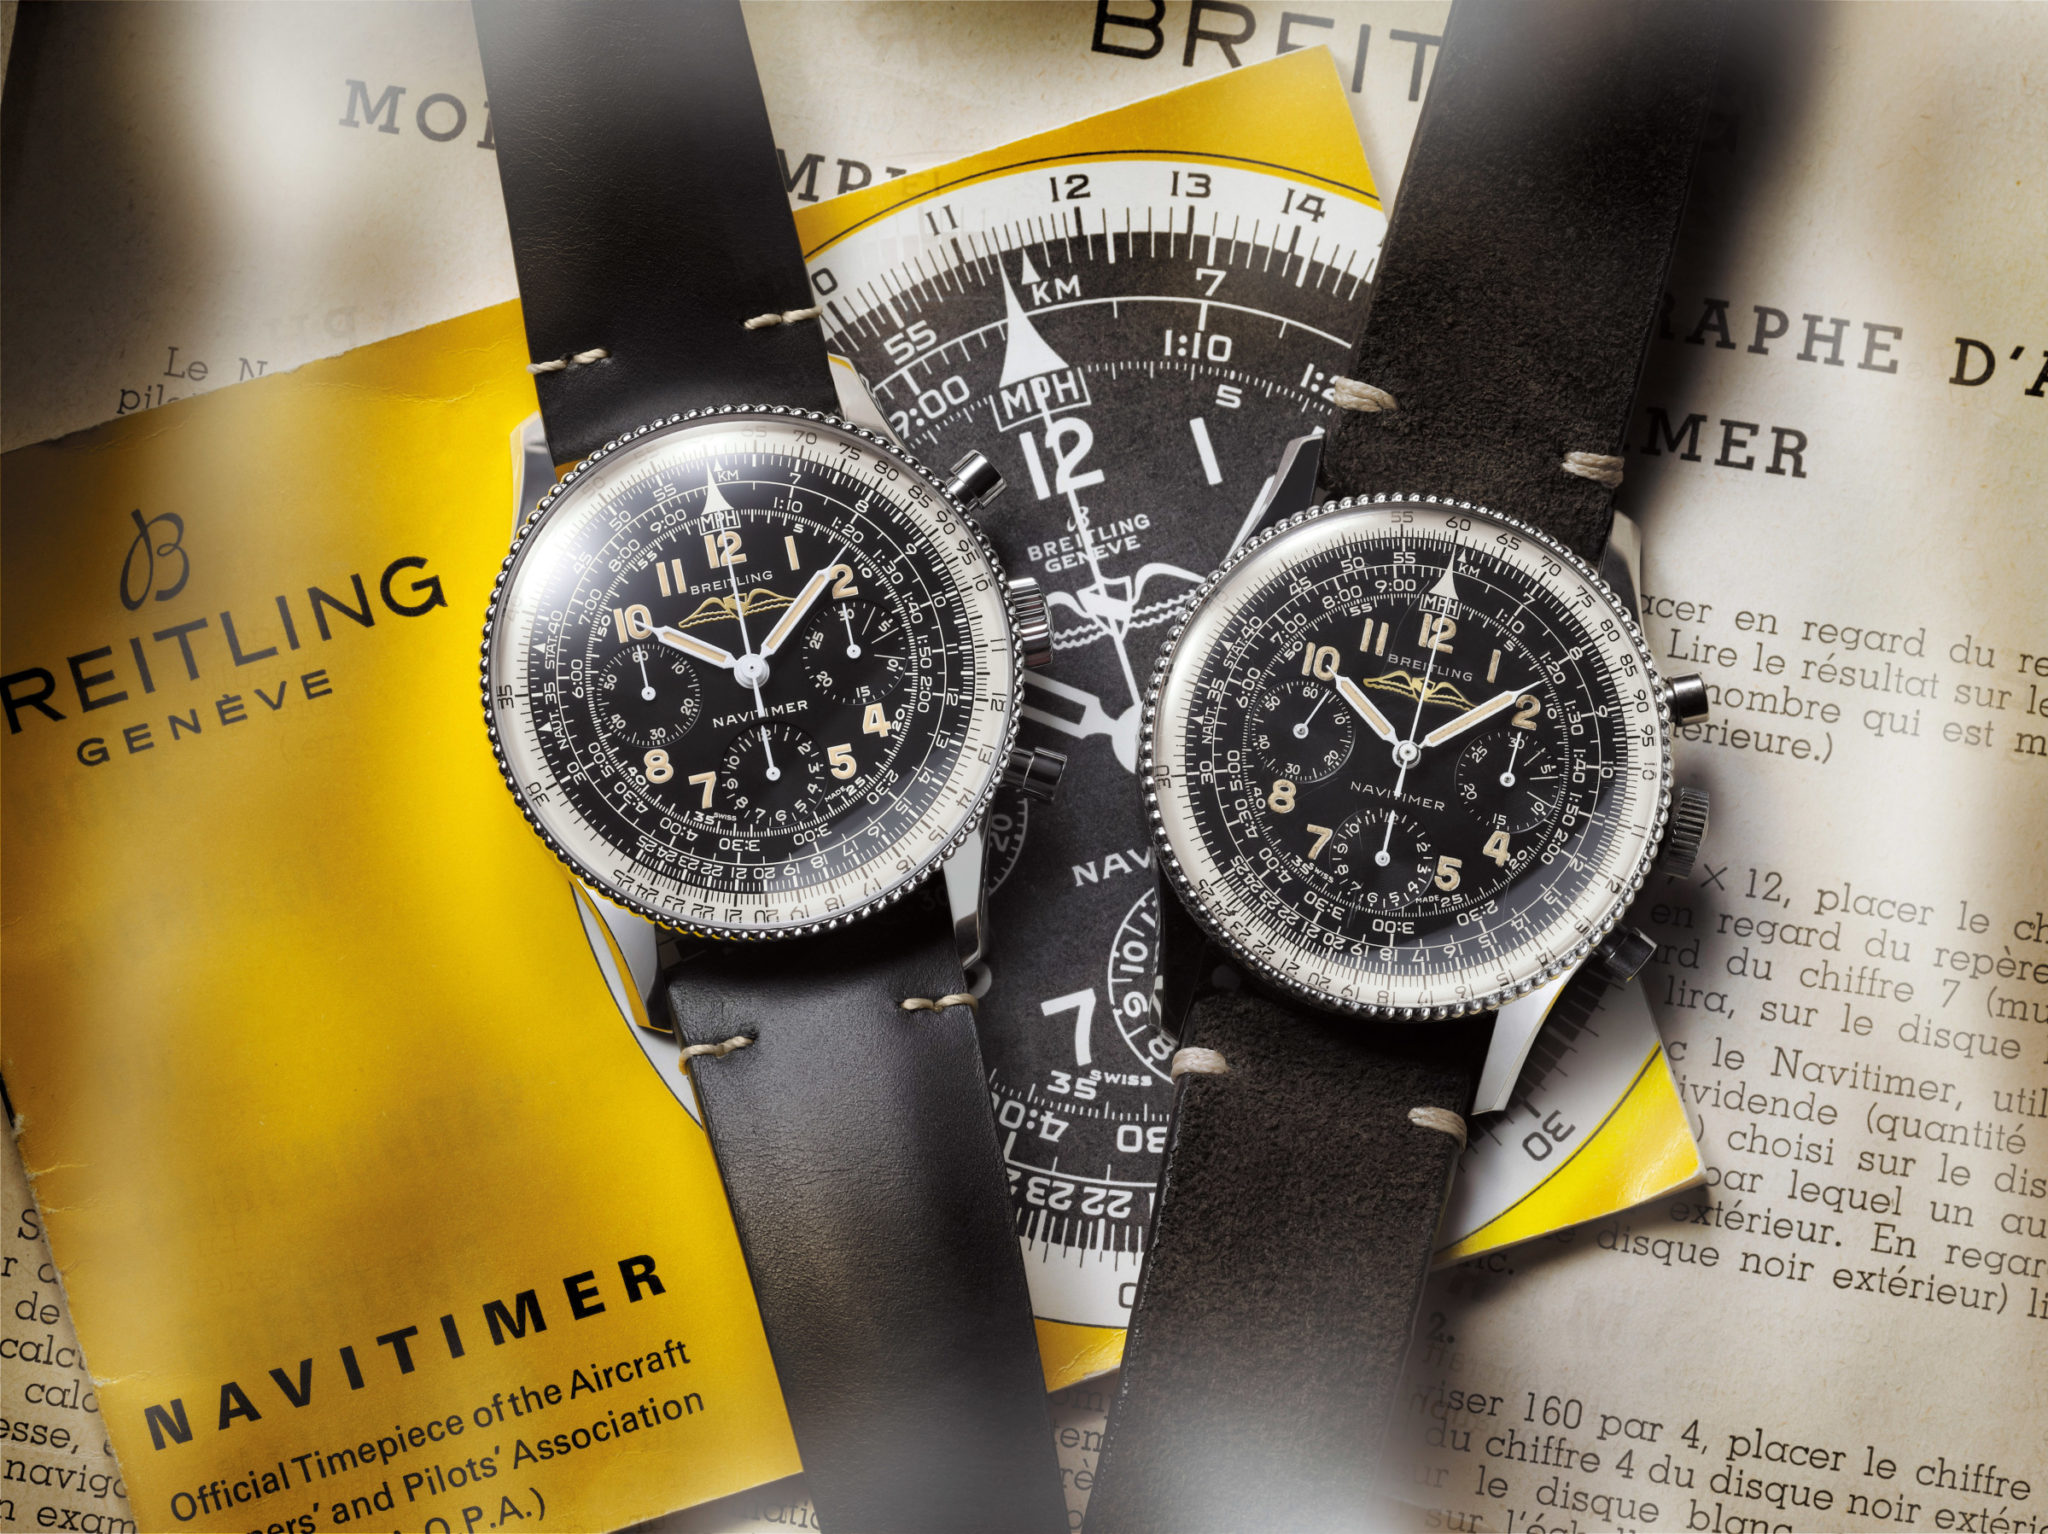 Breitling Navitimer_Ref_806_1959_Re-Edition_and_the_historical_Navitimer_Ref_806_from_1959_left_to_right_21694_14-03-19